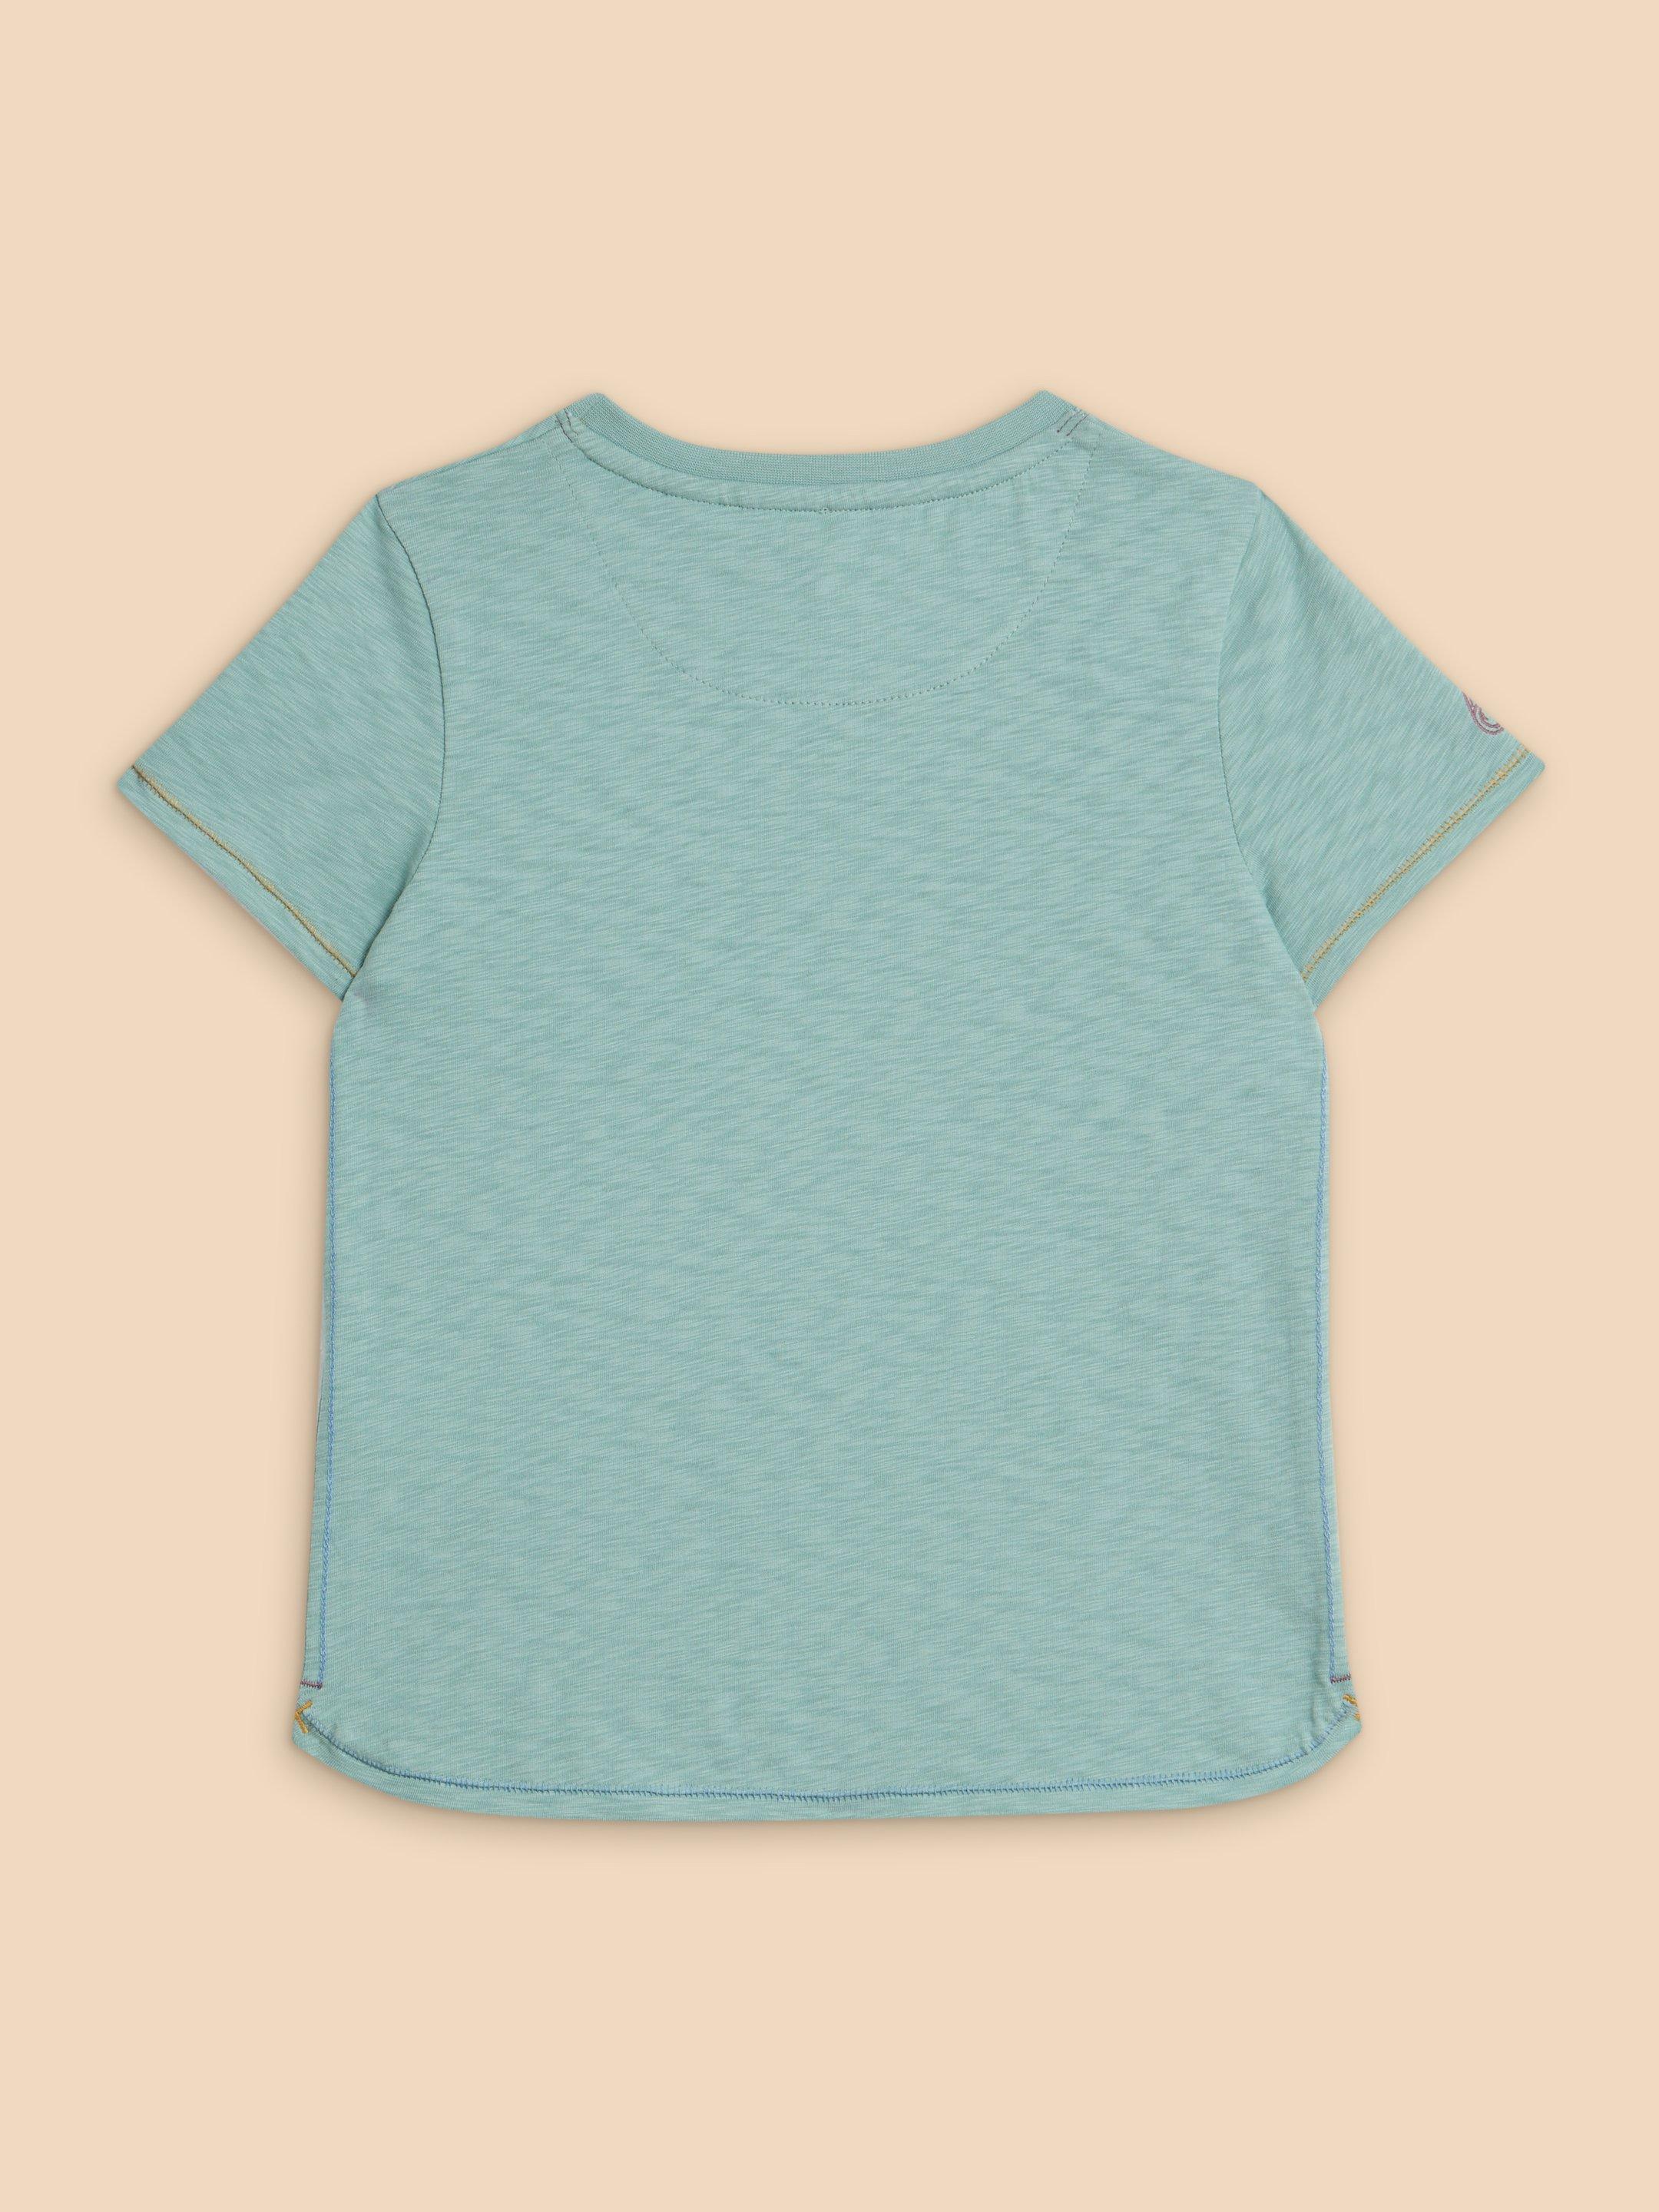 Graphic Escape Tee in MINT GREEN - FLAT BACK